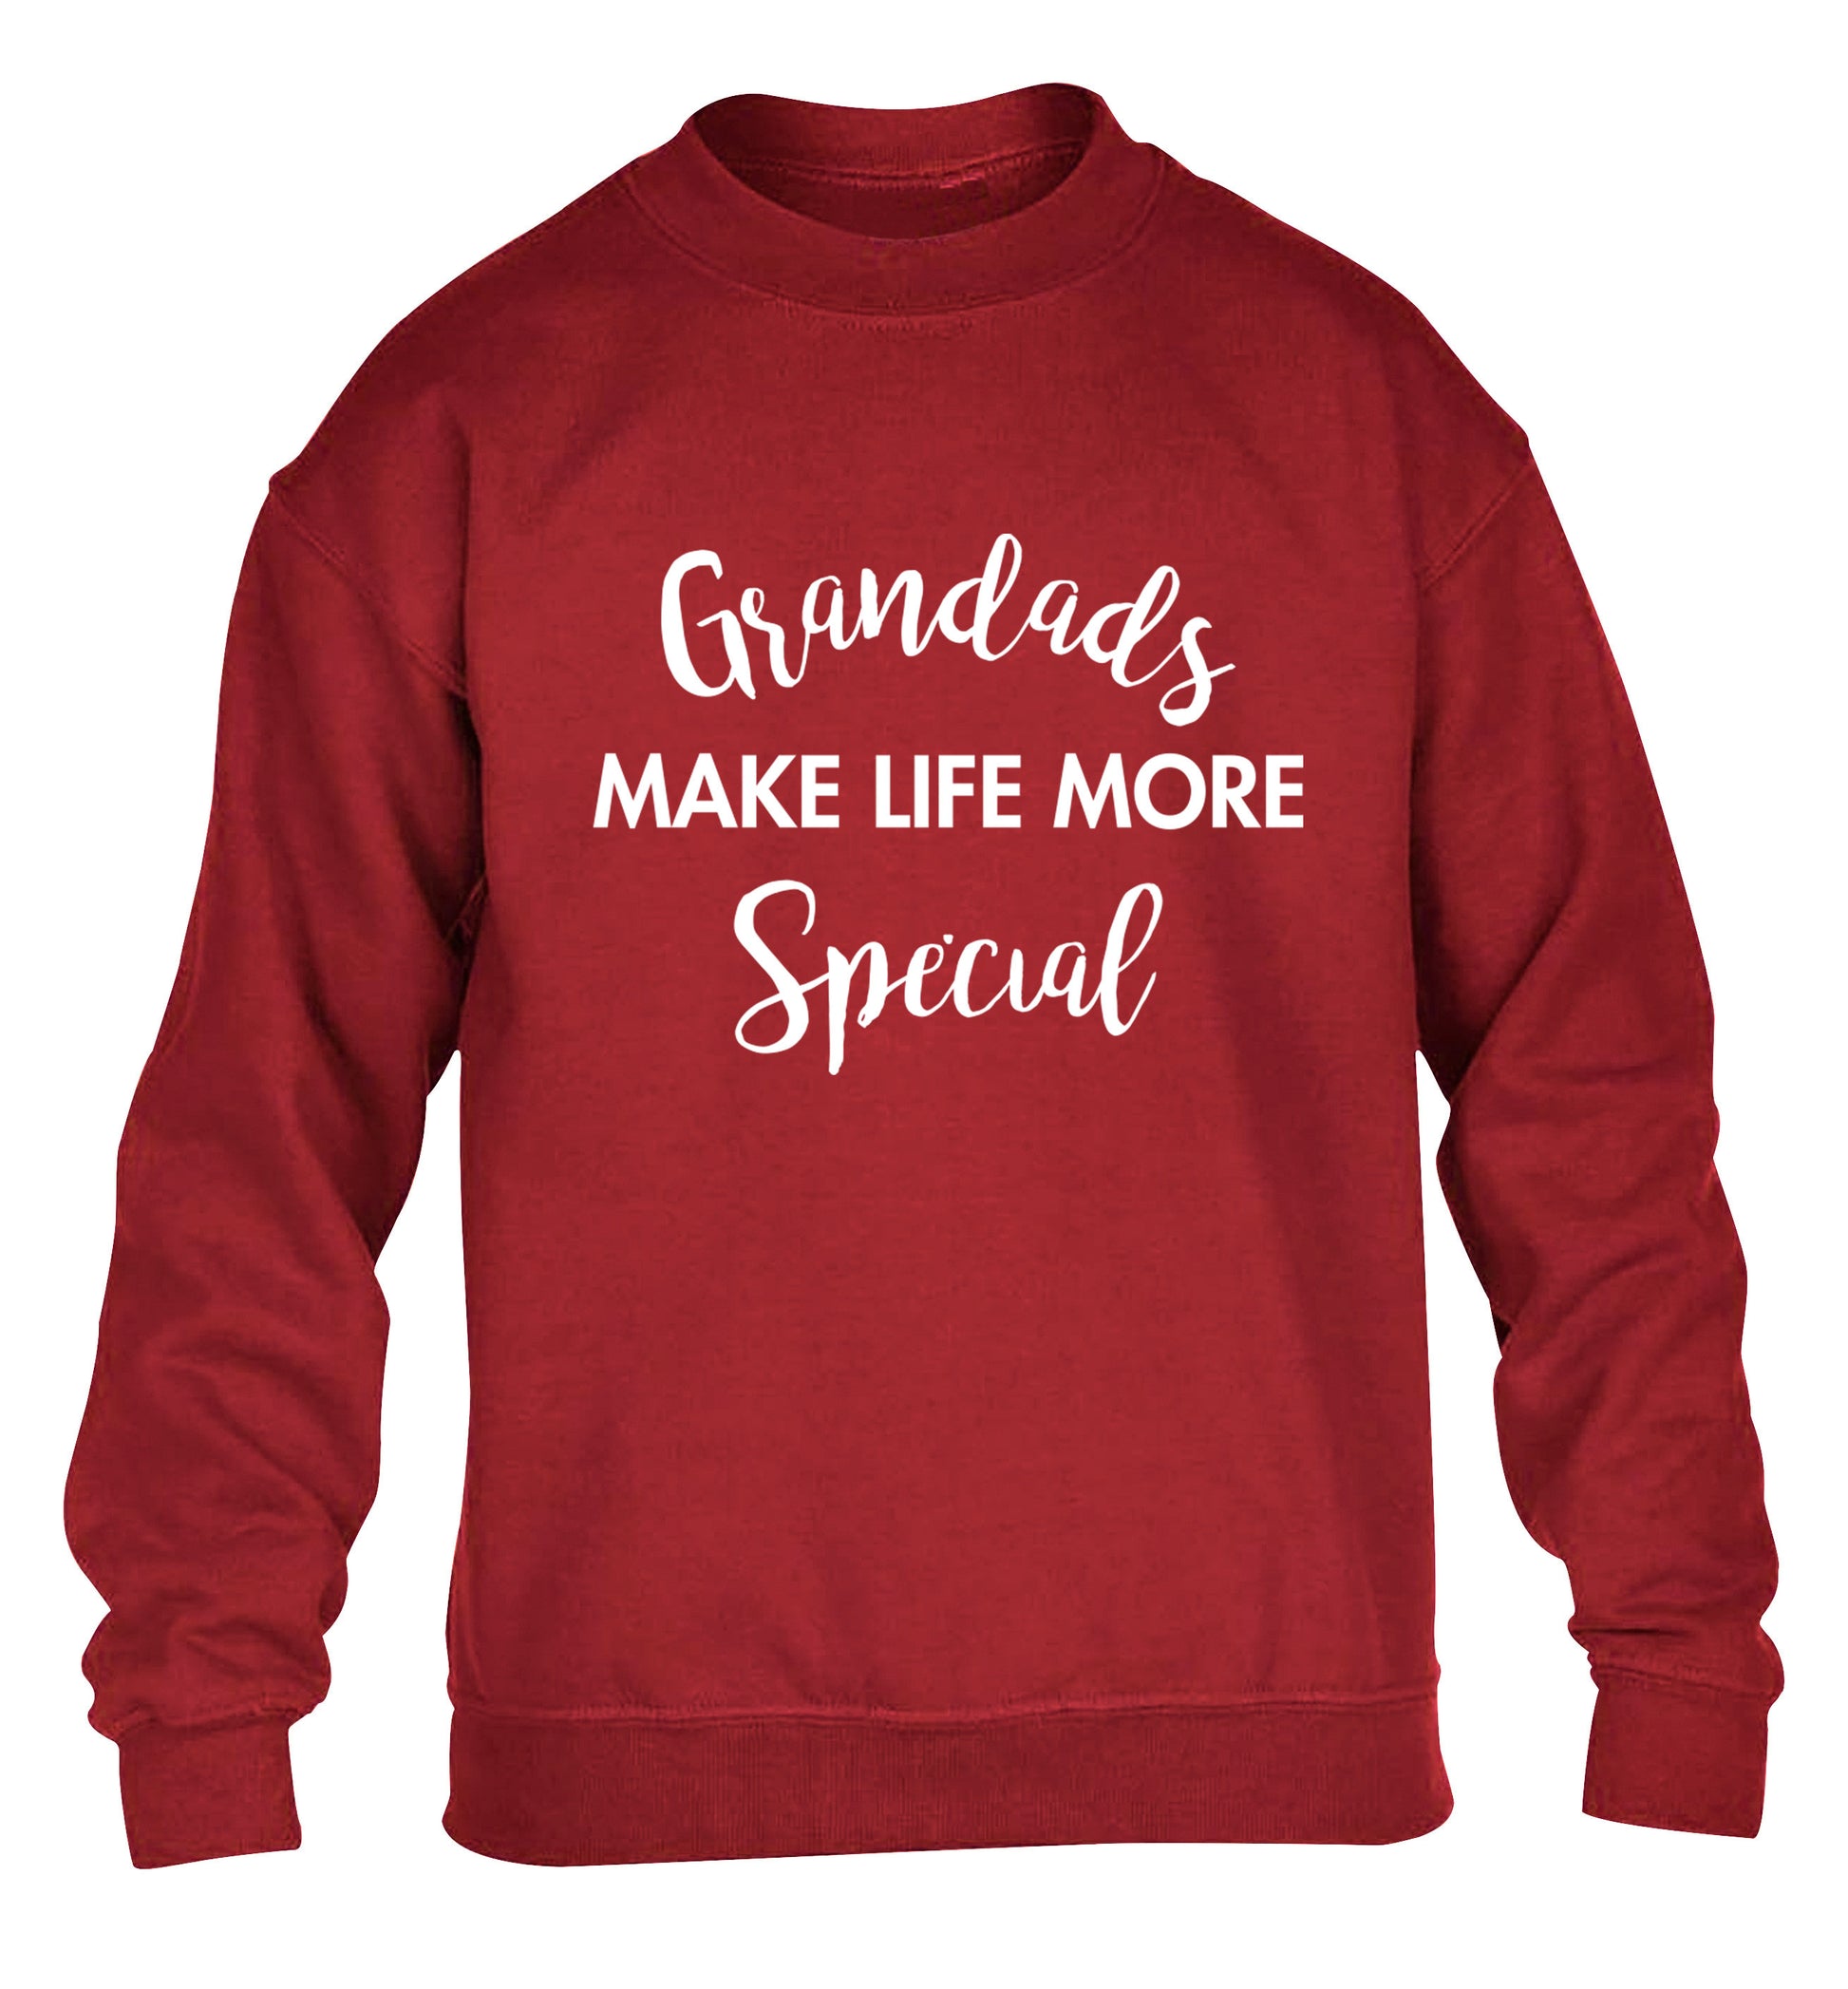 Grandads make life more special children's grey sweater 12-14 Years